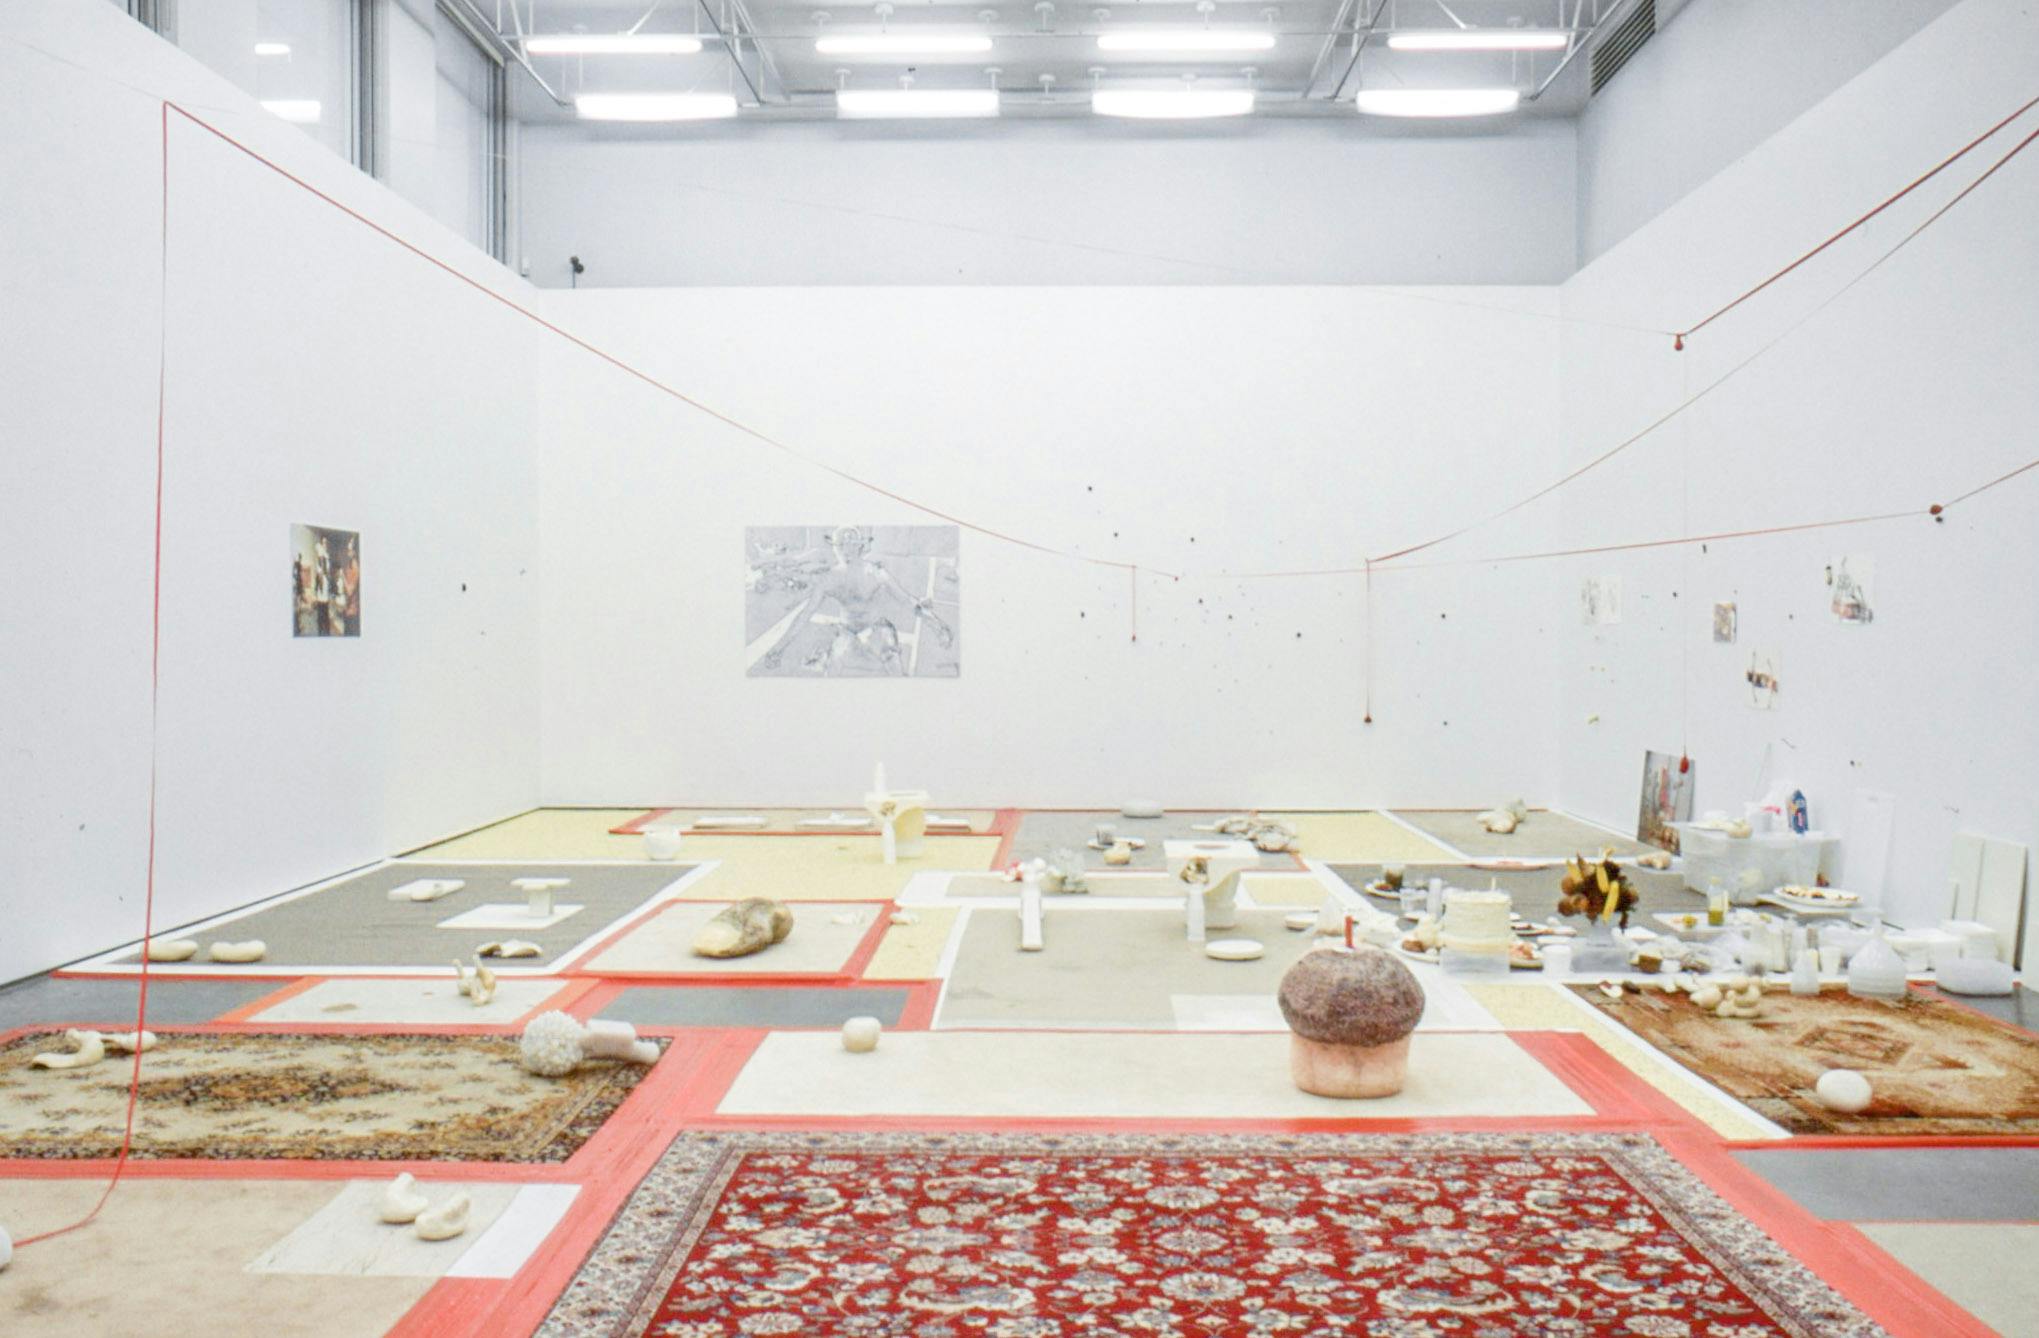 Installation image of artworks in a gallery. A variety of found objects, including shellfish are placed on the floor. The floor is partially covered with the patchwork of various carpets. Some pictures are mounted on the walls.